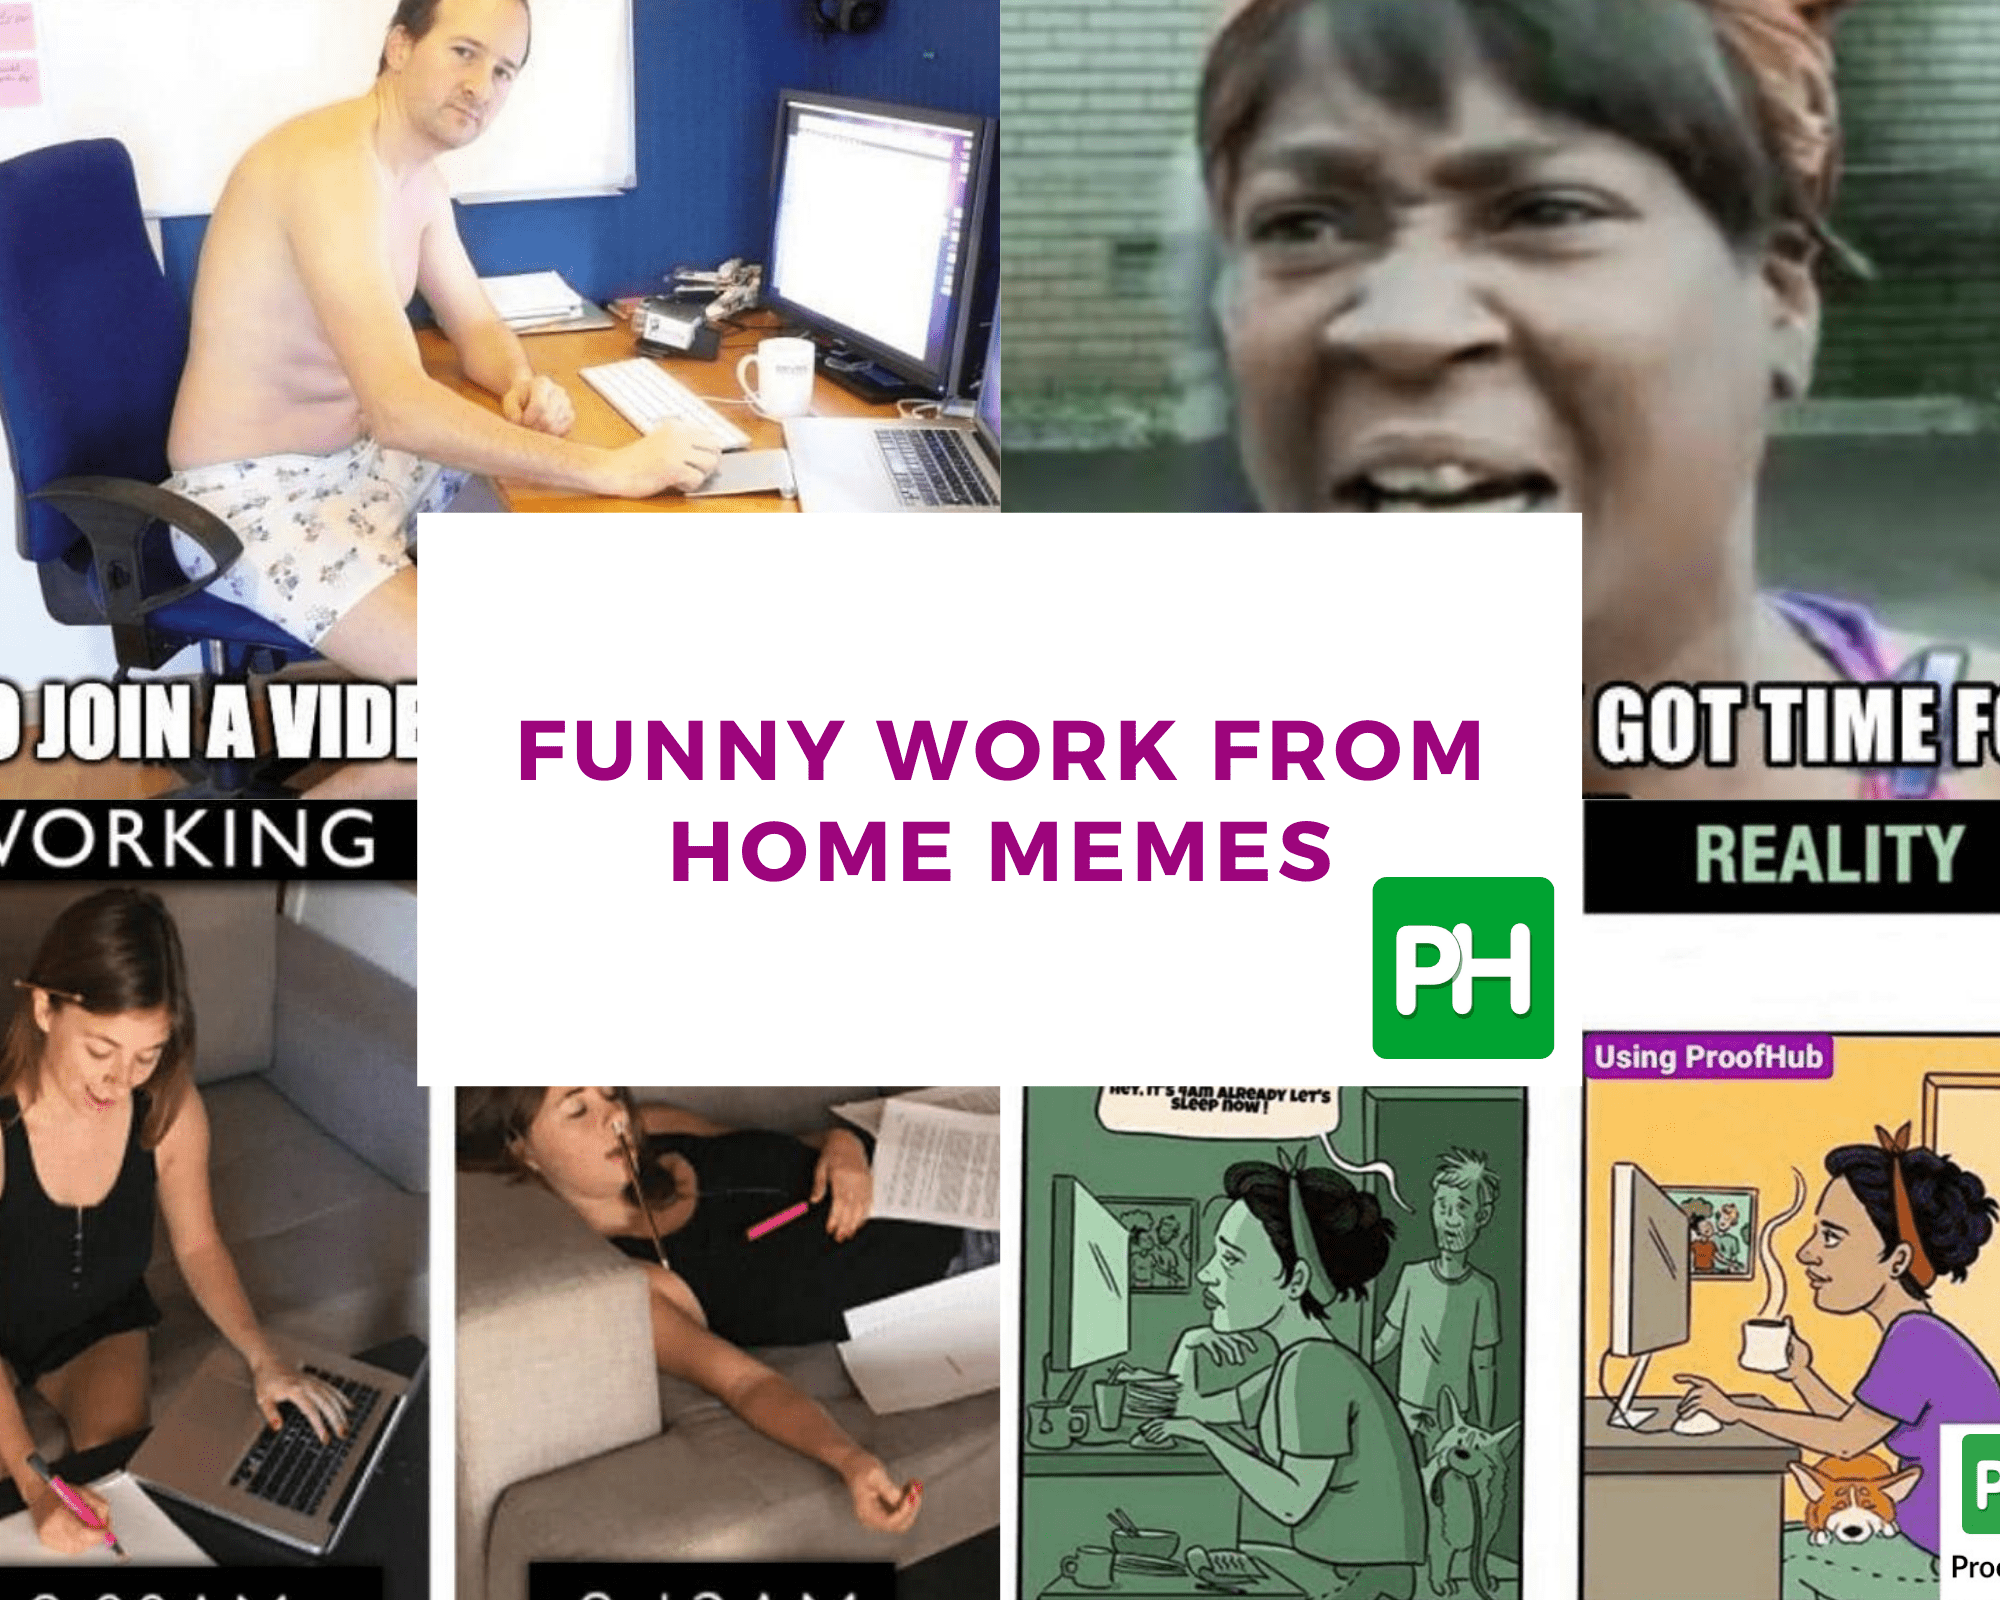 Funny work from home memes you can totally relate to!